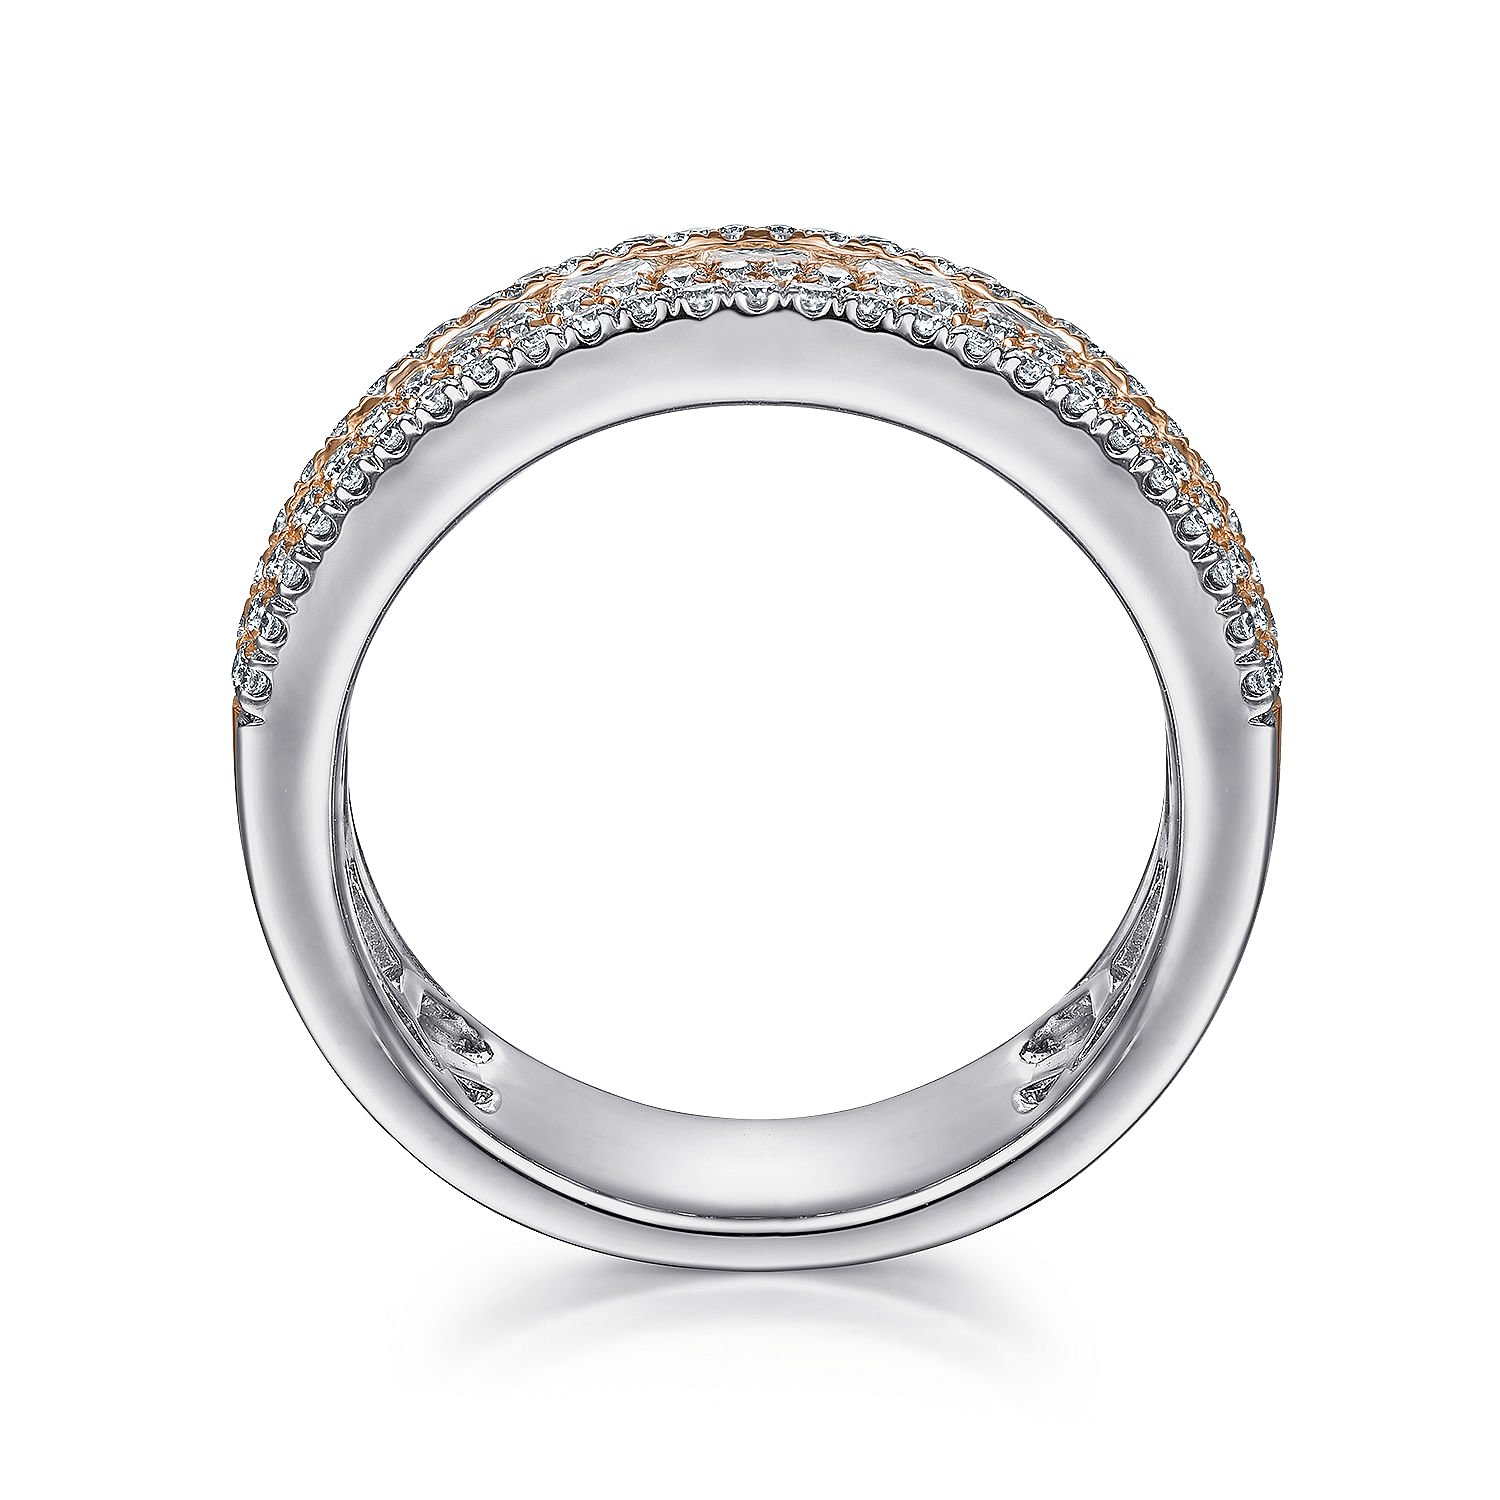 Wide 14K White-Rose Gold Channel Set Diamond  Anniversary Band with Round and Princess Cut Diamonds